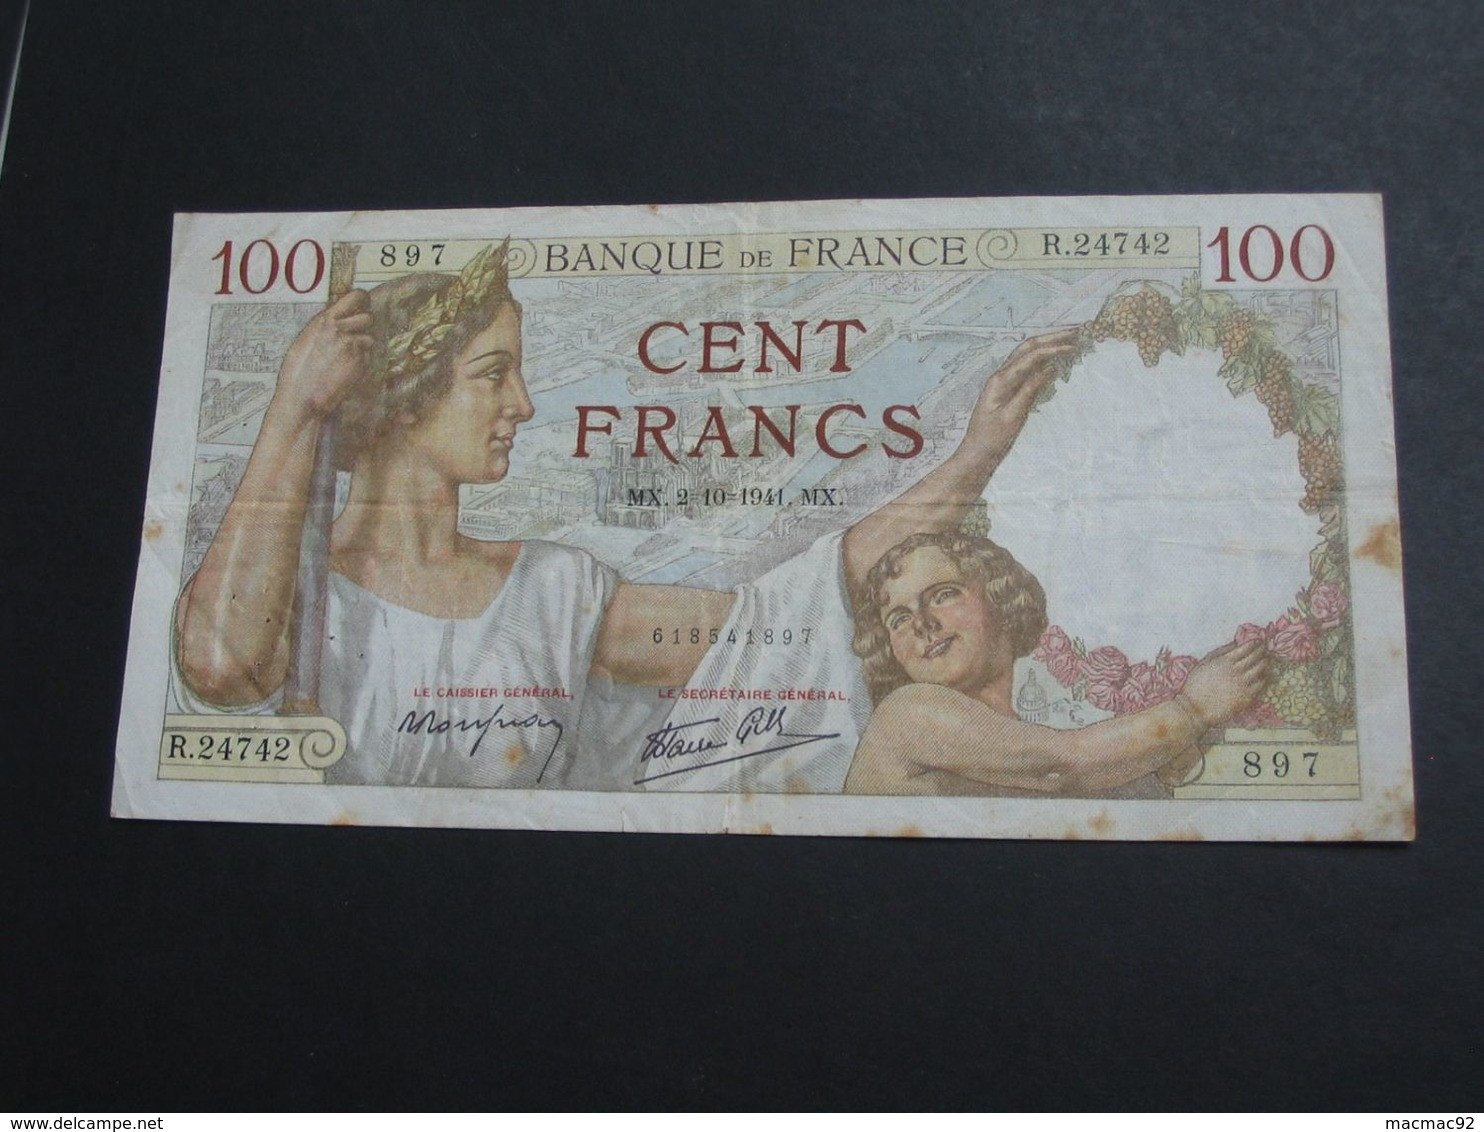 100 Cent Francs - SULLY  - 2-10-1941   **** EN ACHAT IMMEDIAT **** - 100 F 1939-1942 ''Sully''